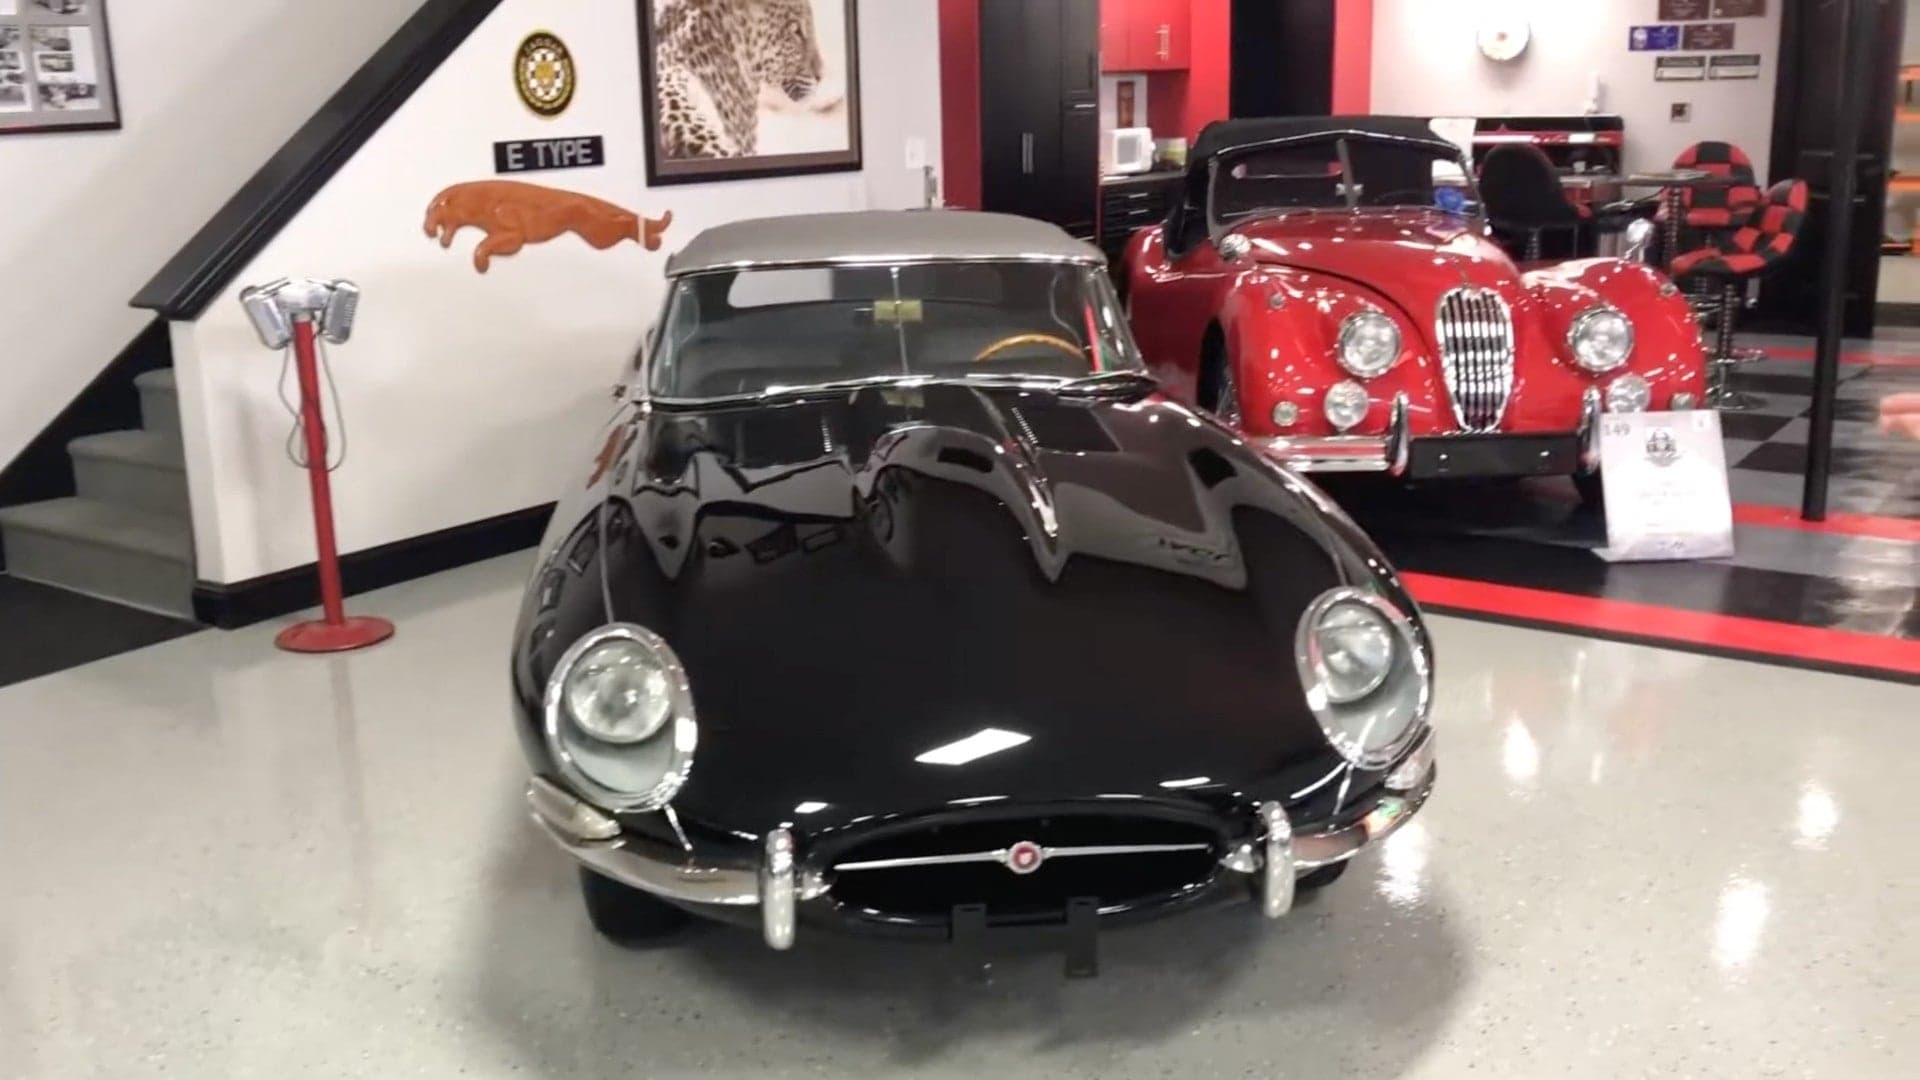 Take an At-Home Tour of This Jaguar Collector’s Incredible Garage